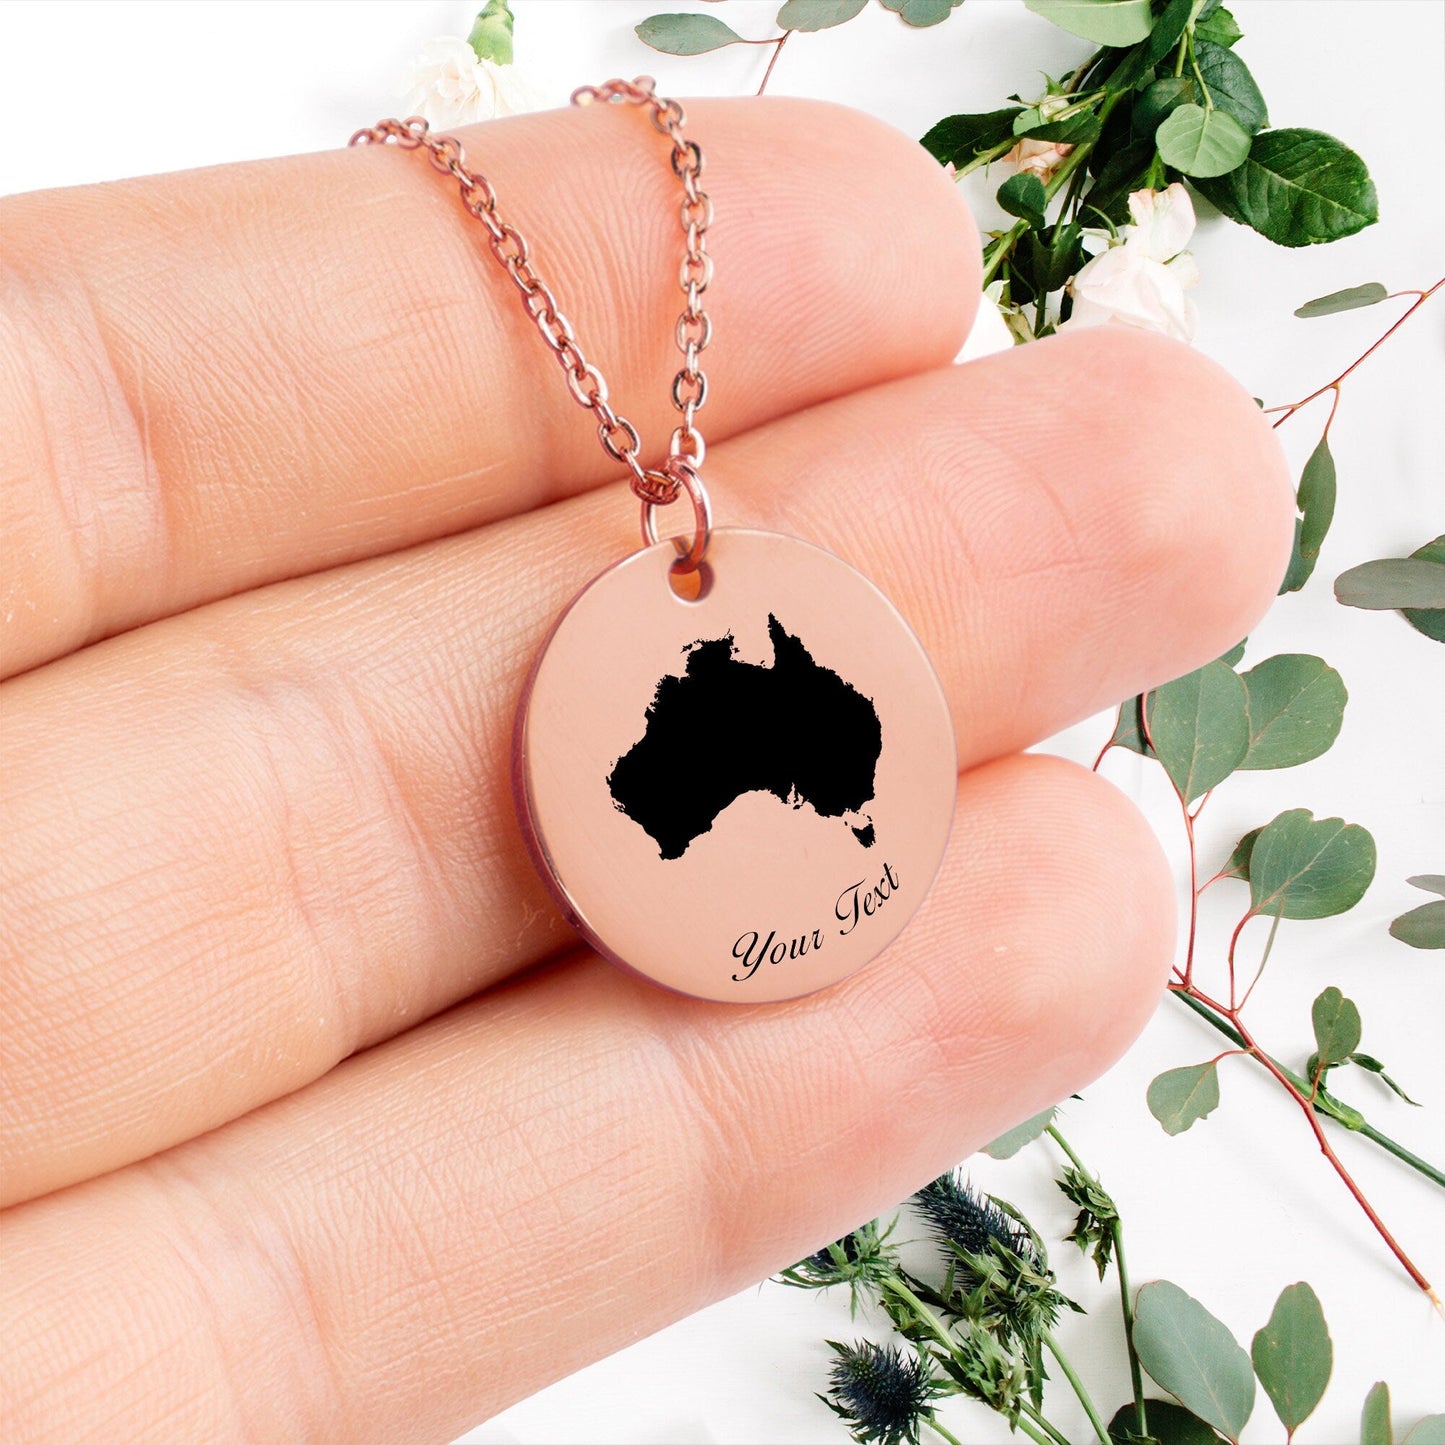 Australia Country Map Necklace, Your Name Necklace, Minimalist Necklace, Personalized Gift, Silver Necklace, Gift For Him Her